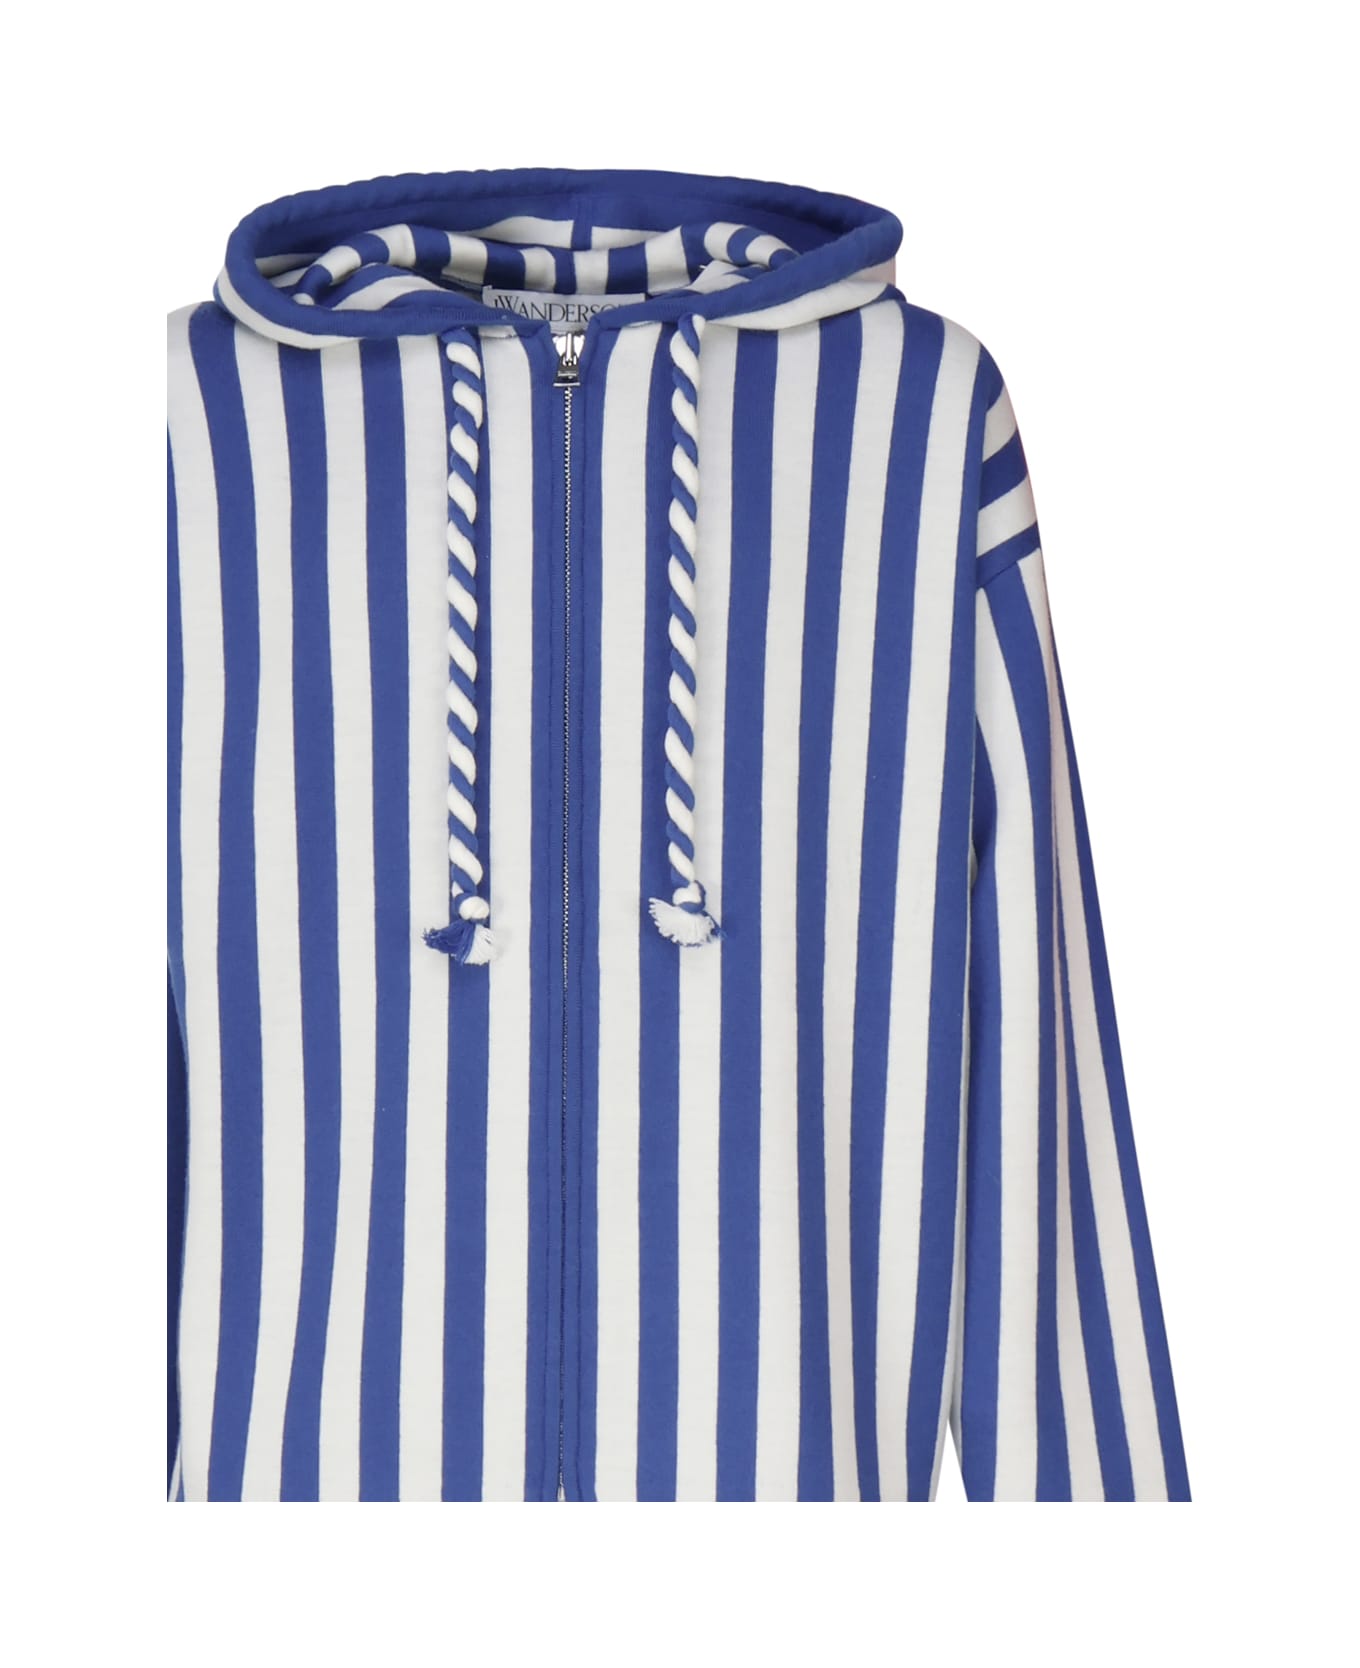 J.W. Anderson Hooded Cardigan - Blue/white